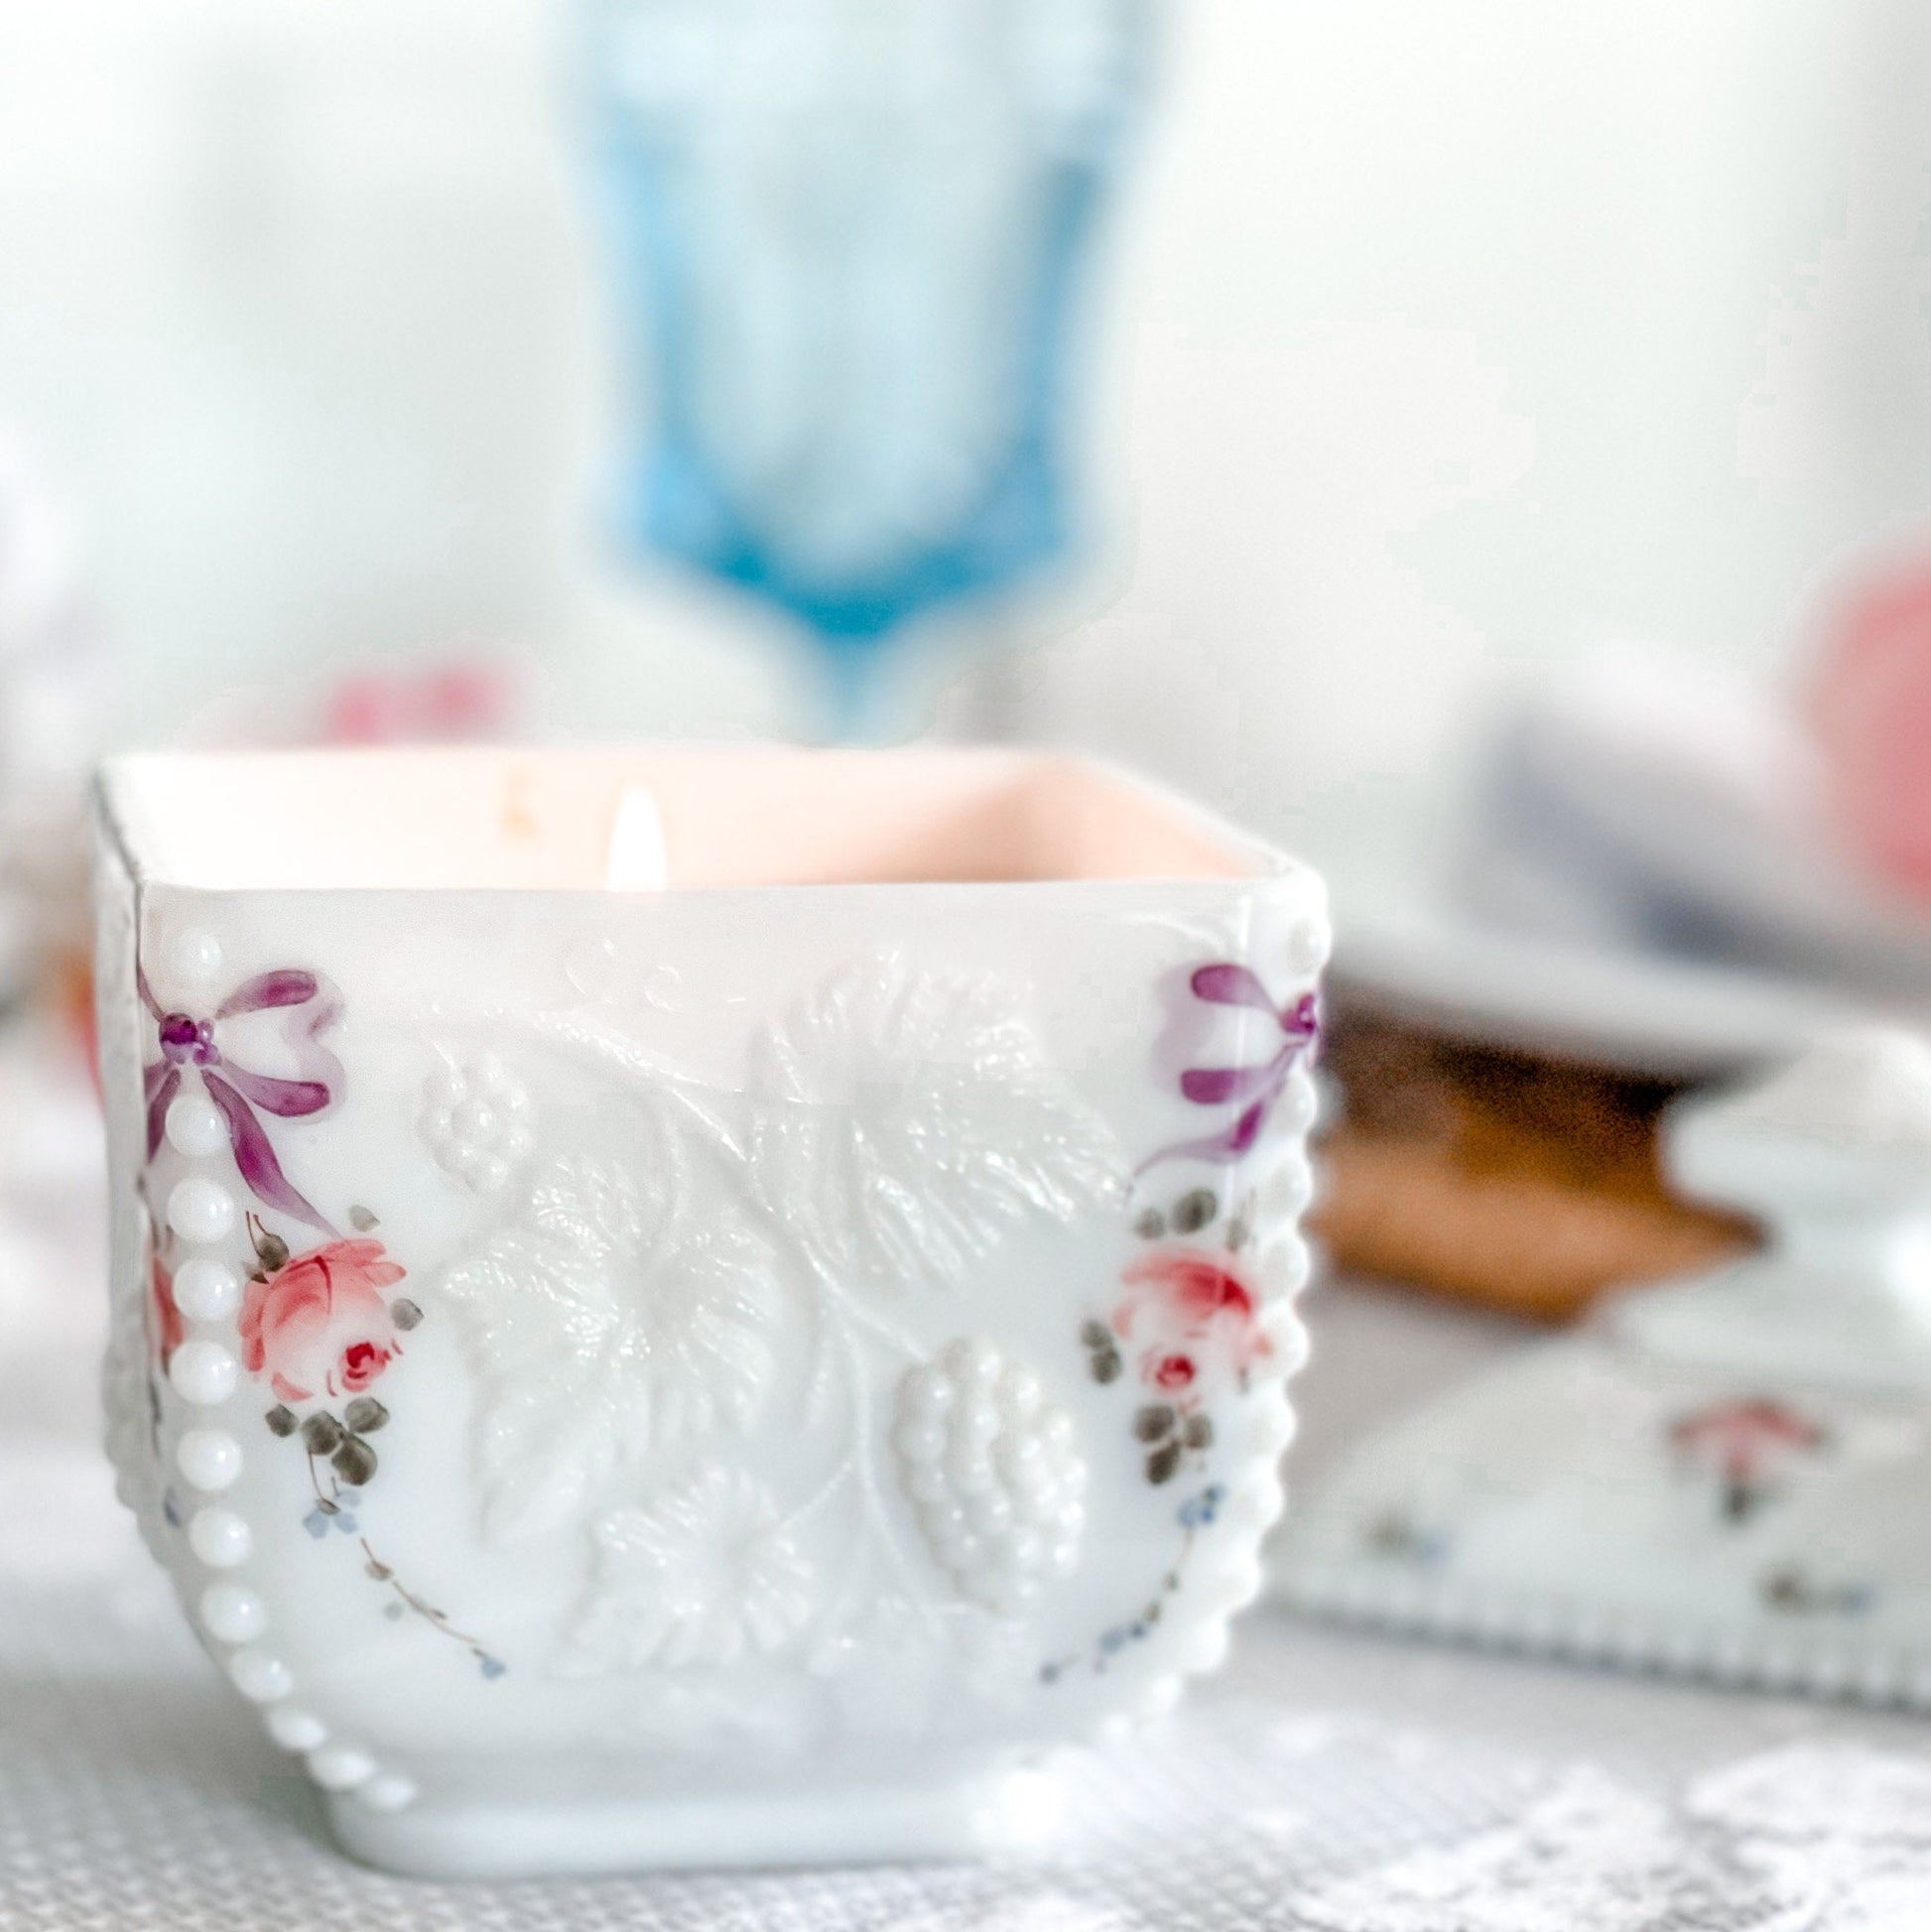 Soy Candles, Vintage, Milk Glass, Best Friend Gifts, Housewarming Gifts